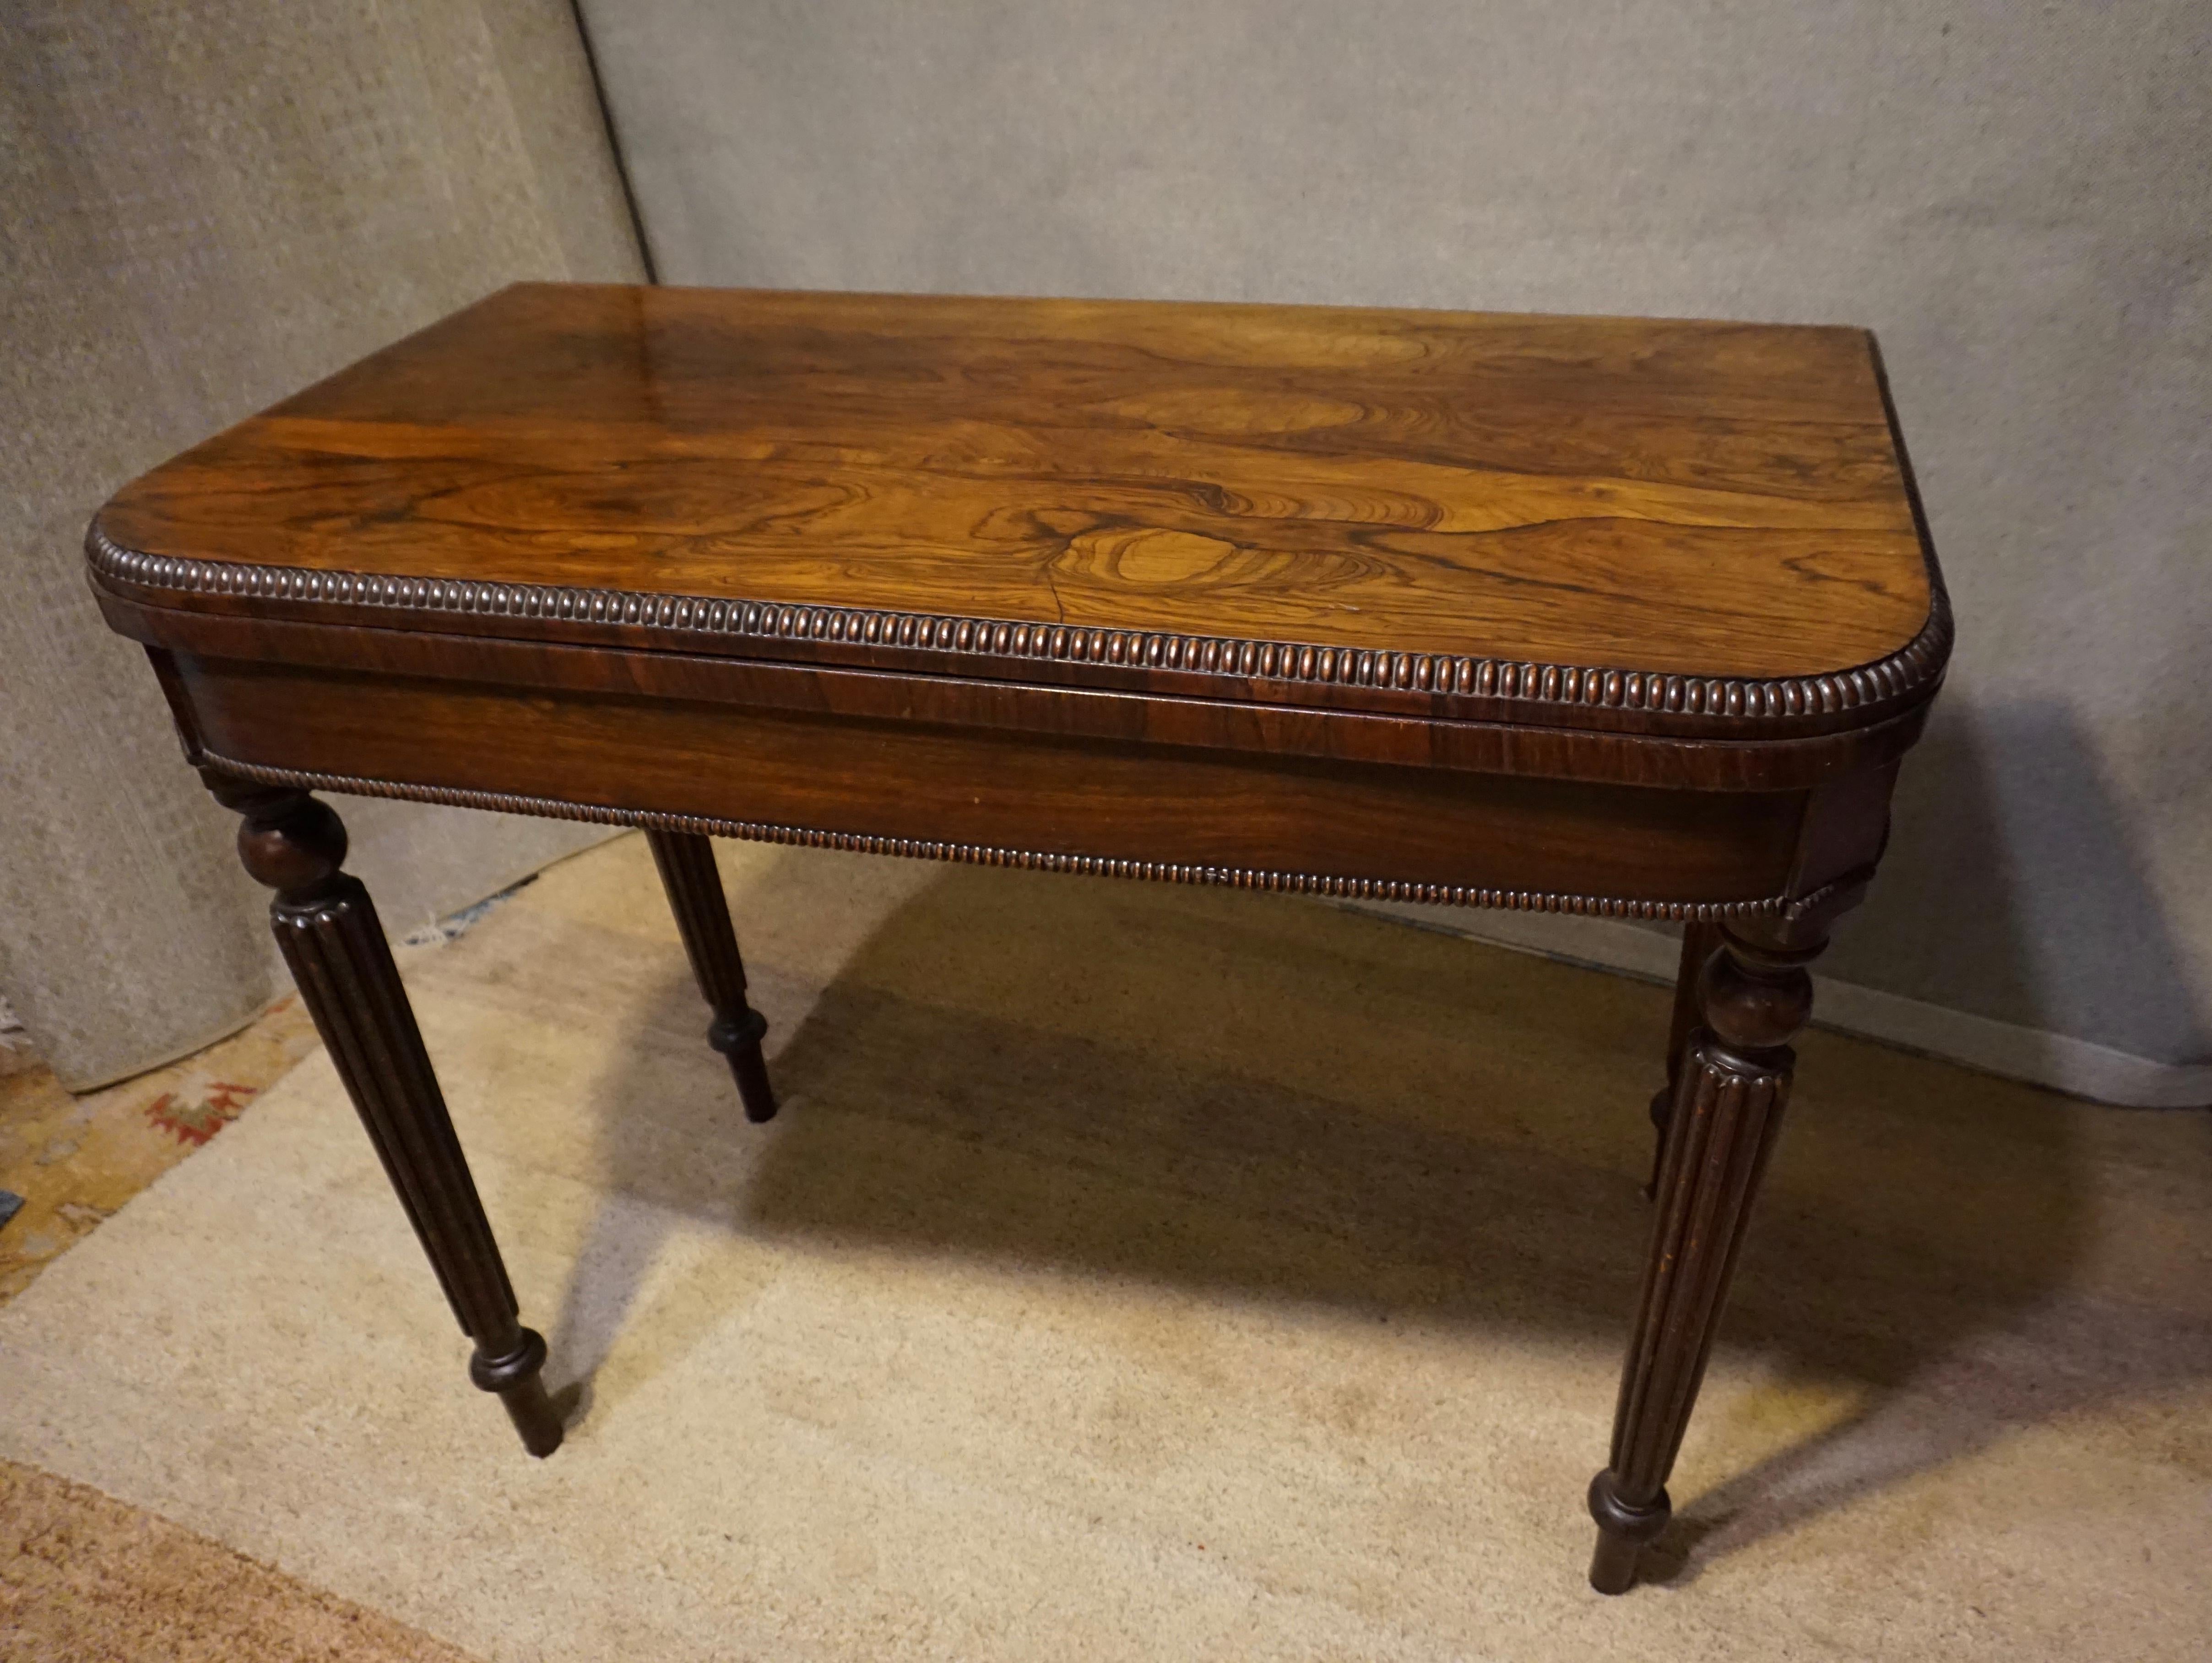 Victorian rosewood games table. High end construction and handsome proportions with carved legs and a beaded edge. Original felt top. Excellent grain and patina.

circa 1870s.